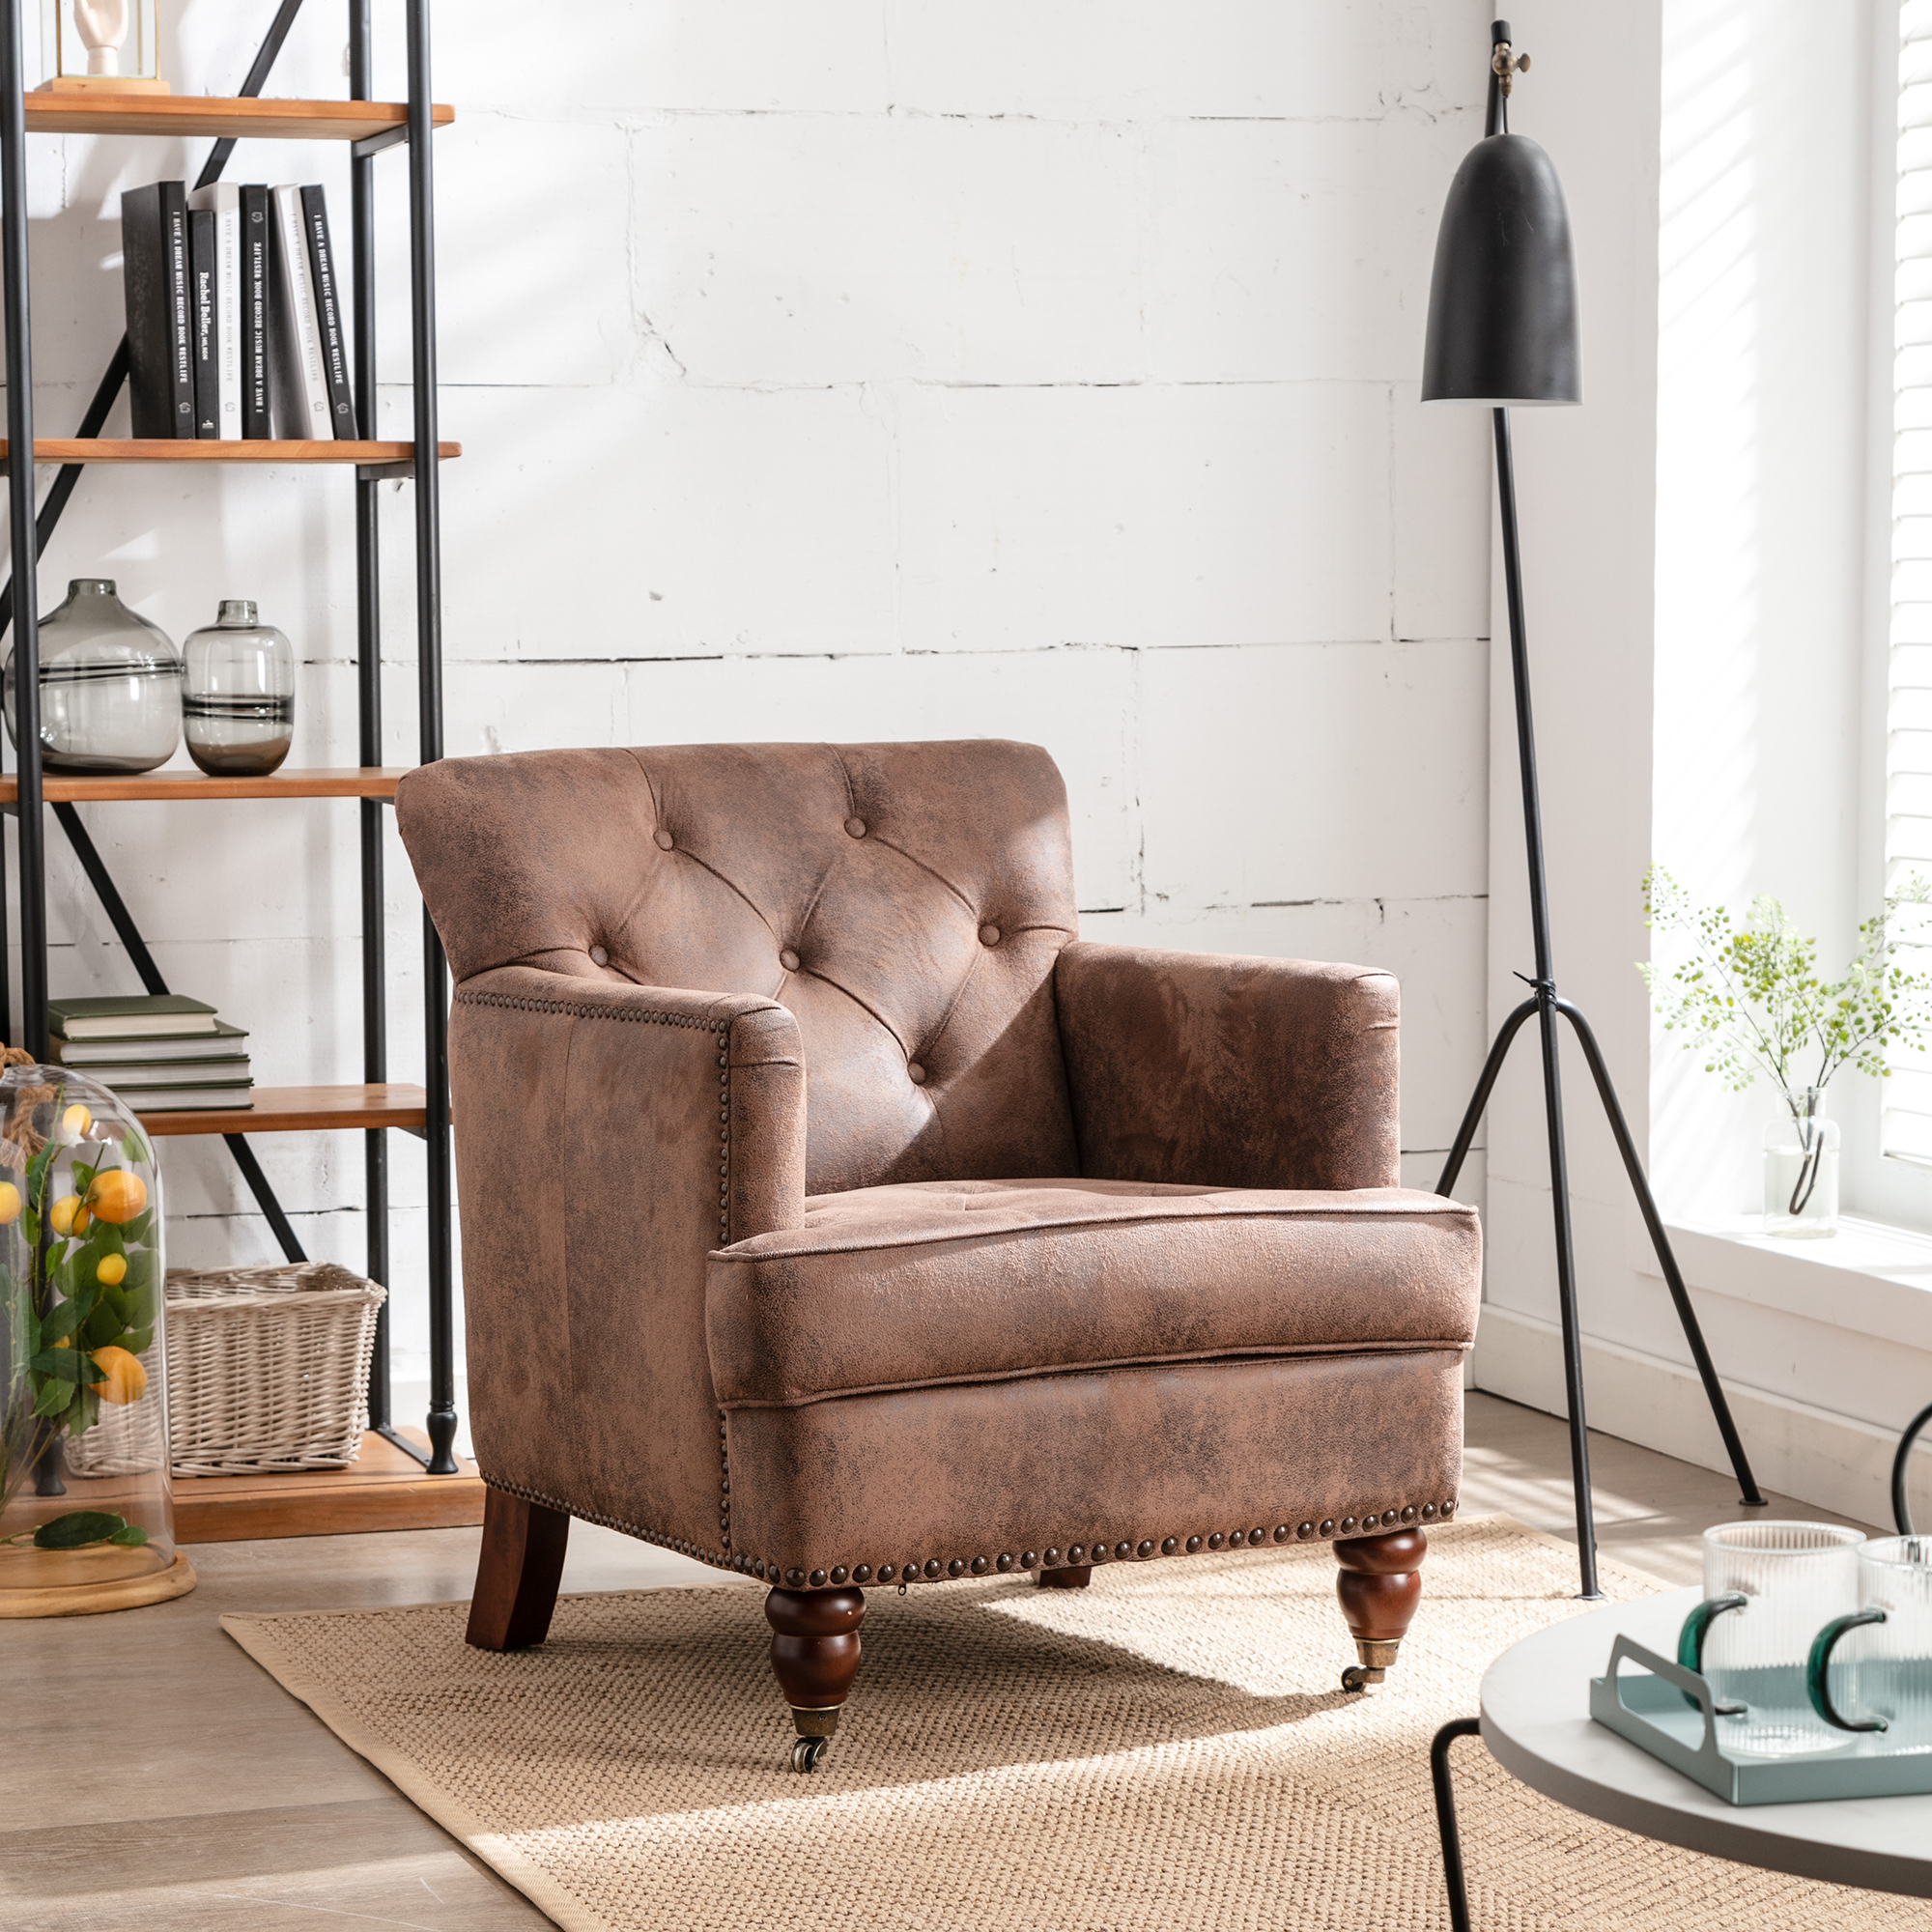 Hengming Living leisure Upholstered Fabric Club Chair, Antique Brown-CASAINC